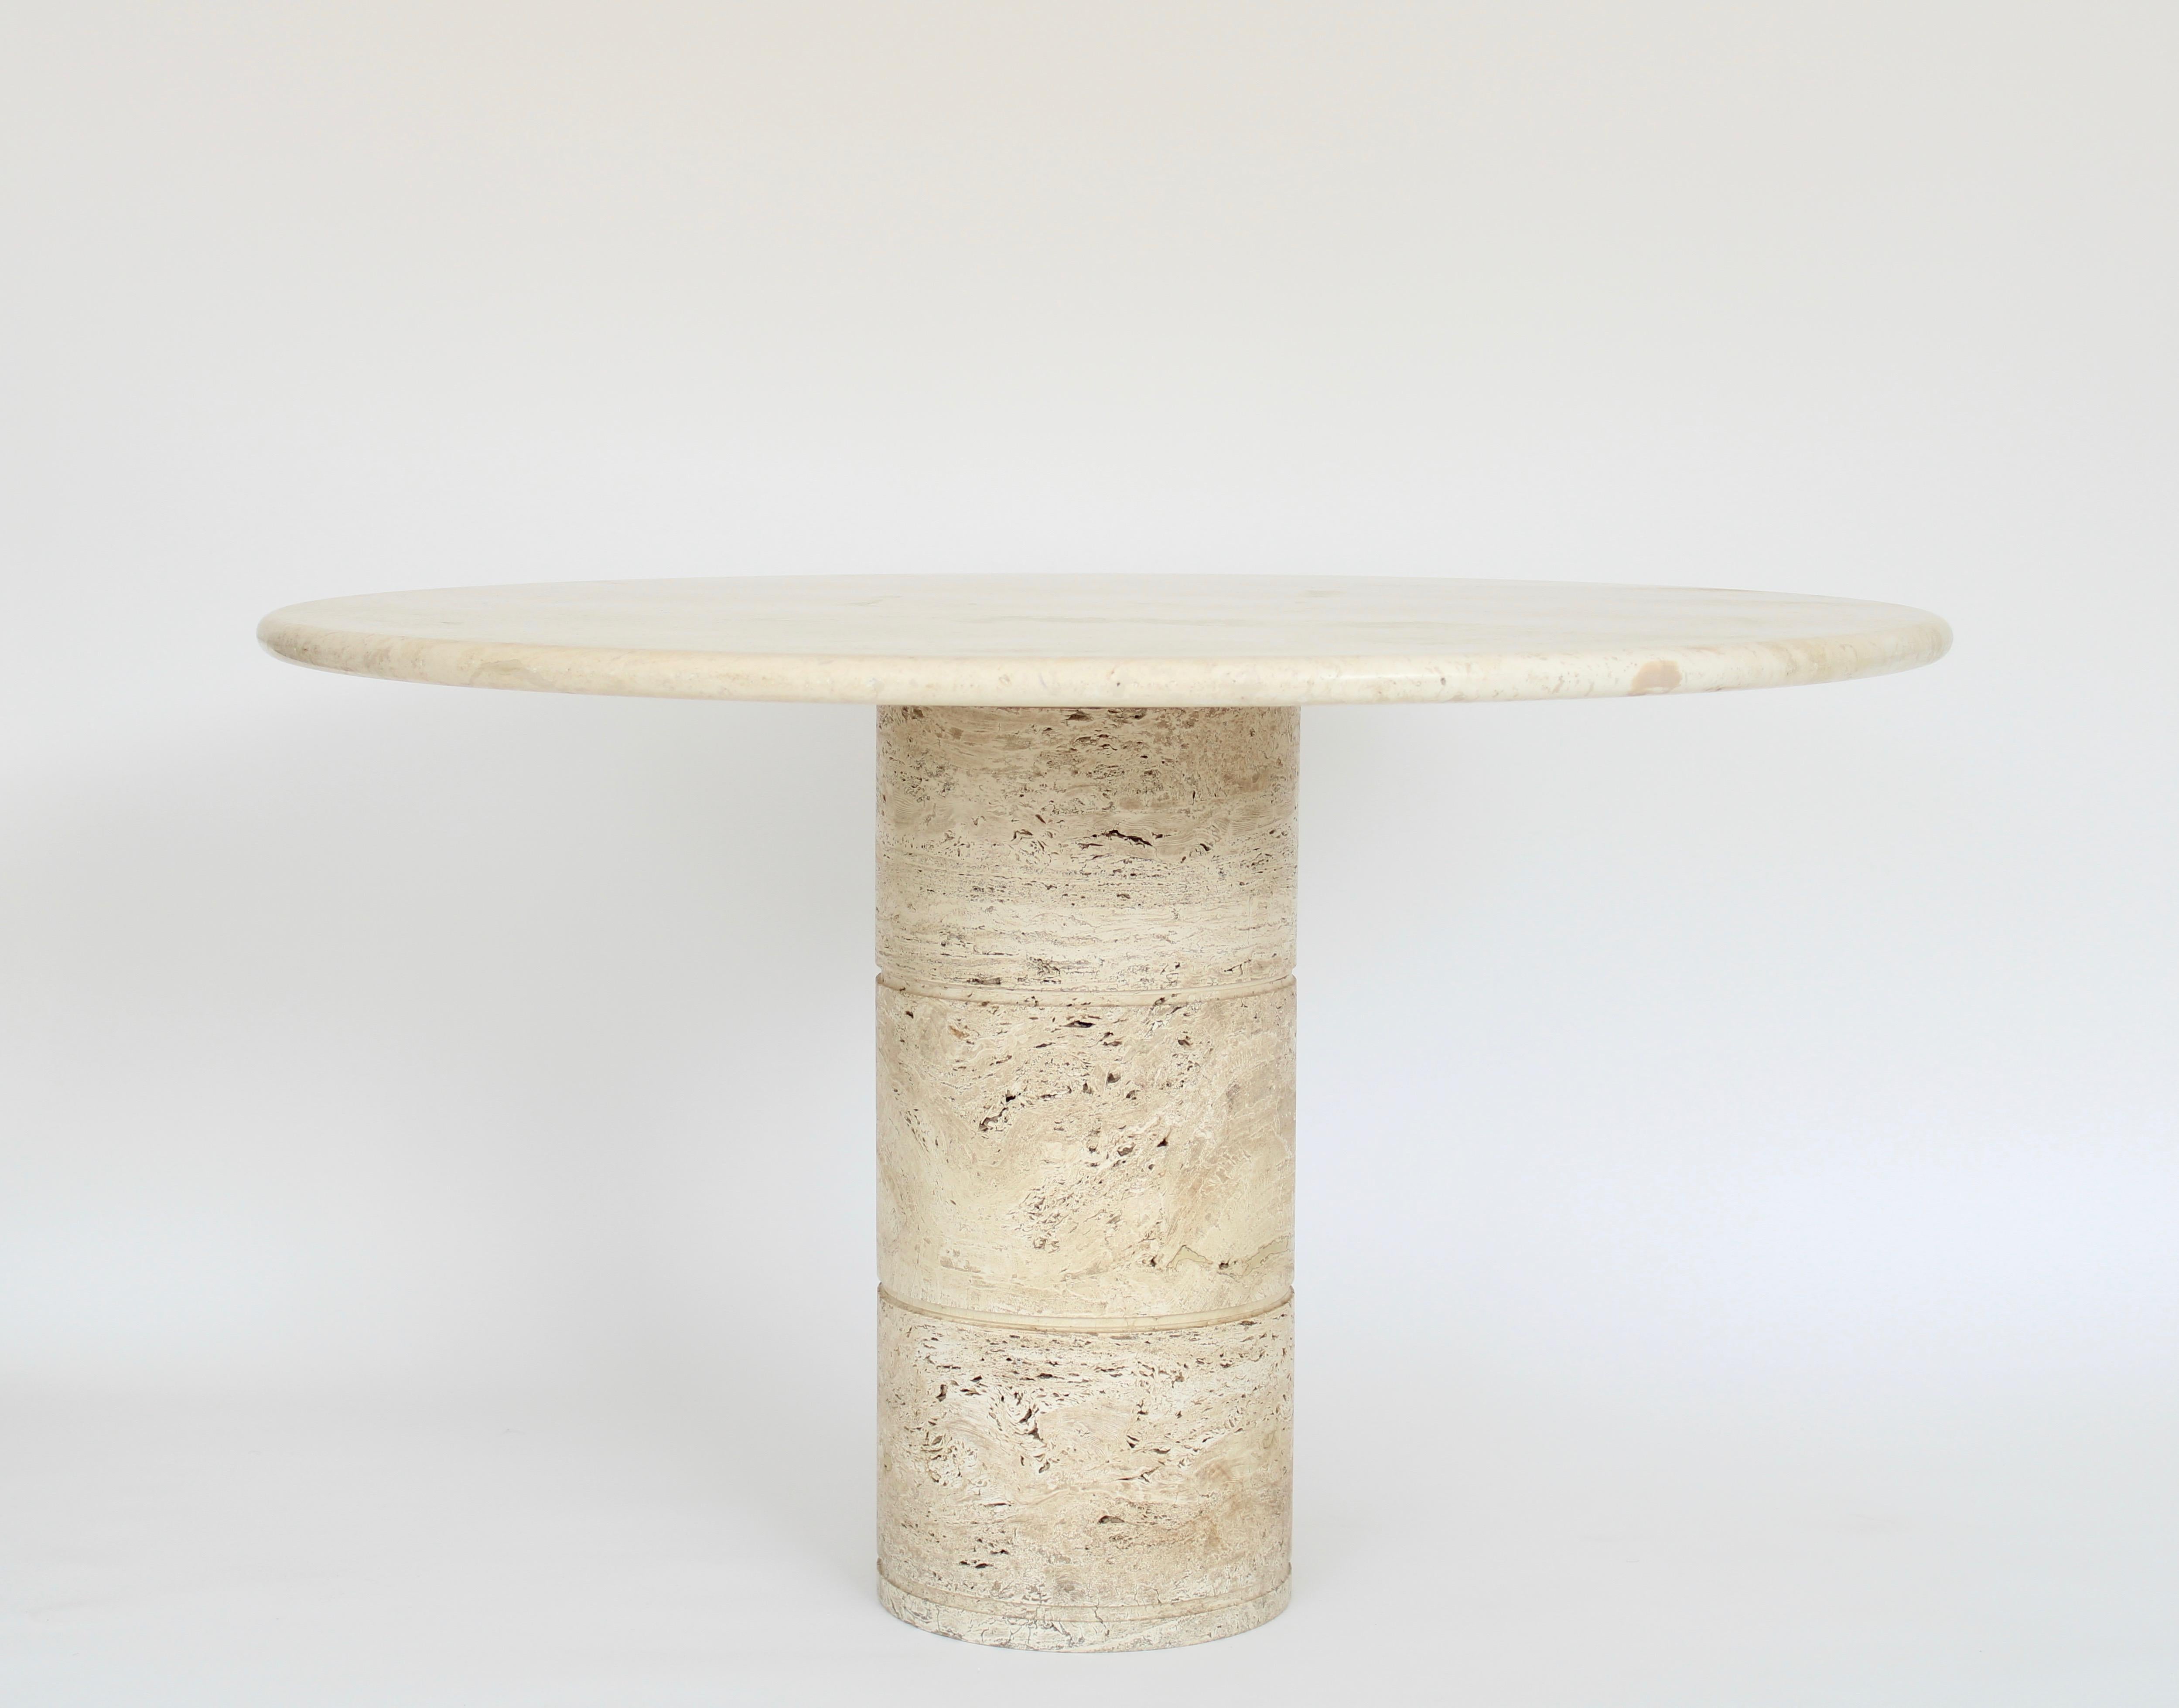 Italian round top cream travertine dining or center table on a round column base.
Variegated tones of cream and beige travertine marble, Italy, circa 1970.
The top is honed and not shiny but sealed with a matte sealer.
The base is more heavily